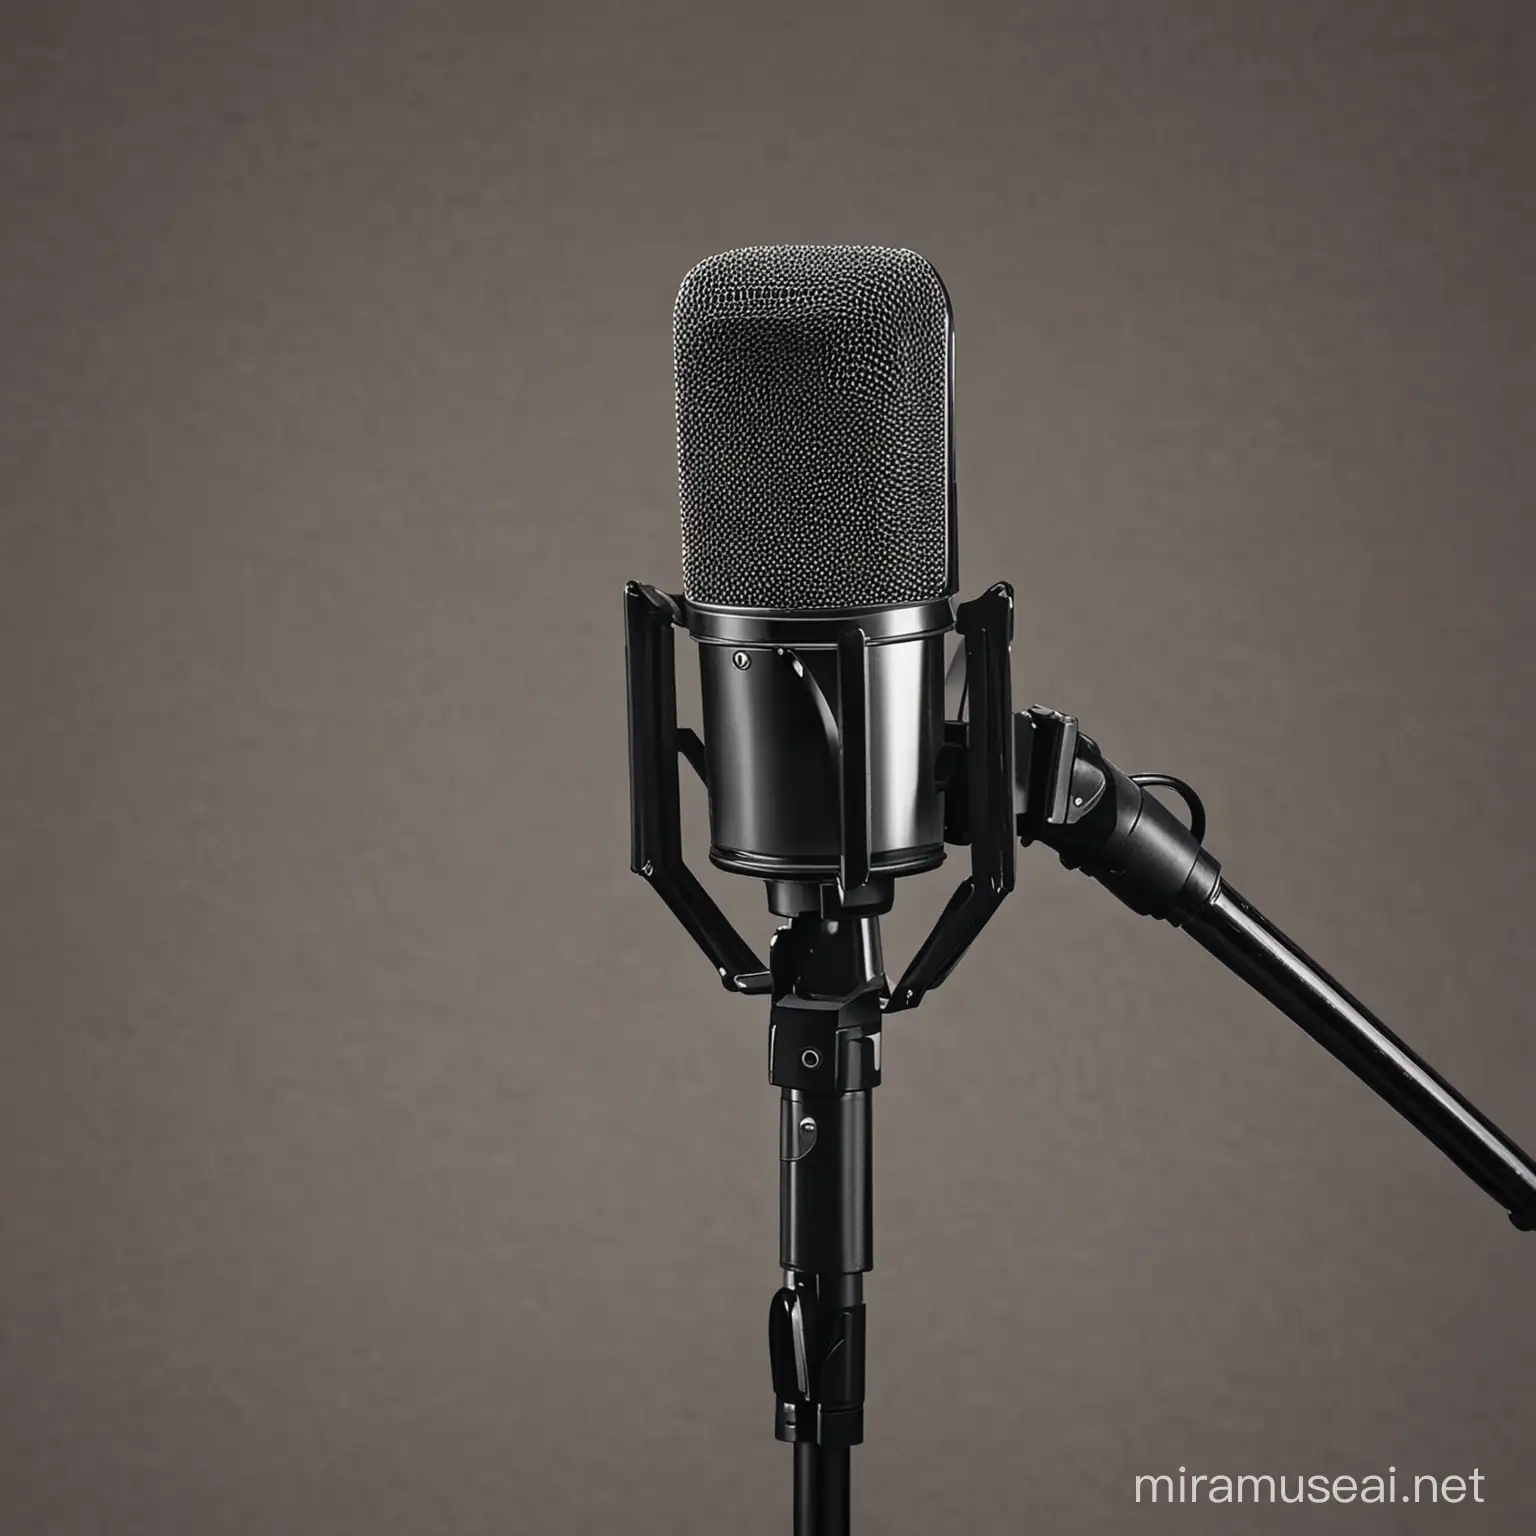 Podcast Banner with Microphone Professional Recording Equipment for Broadcasting